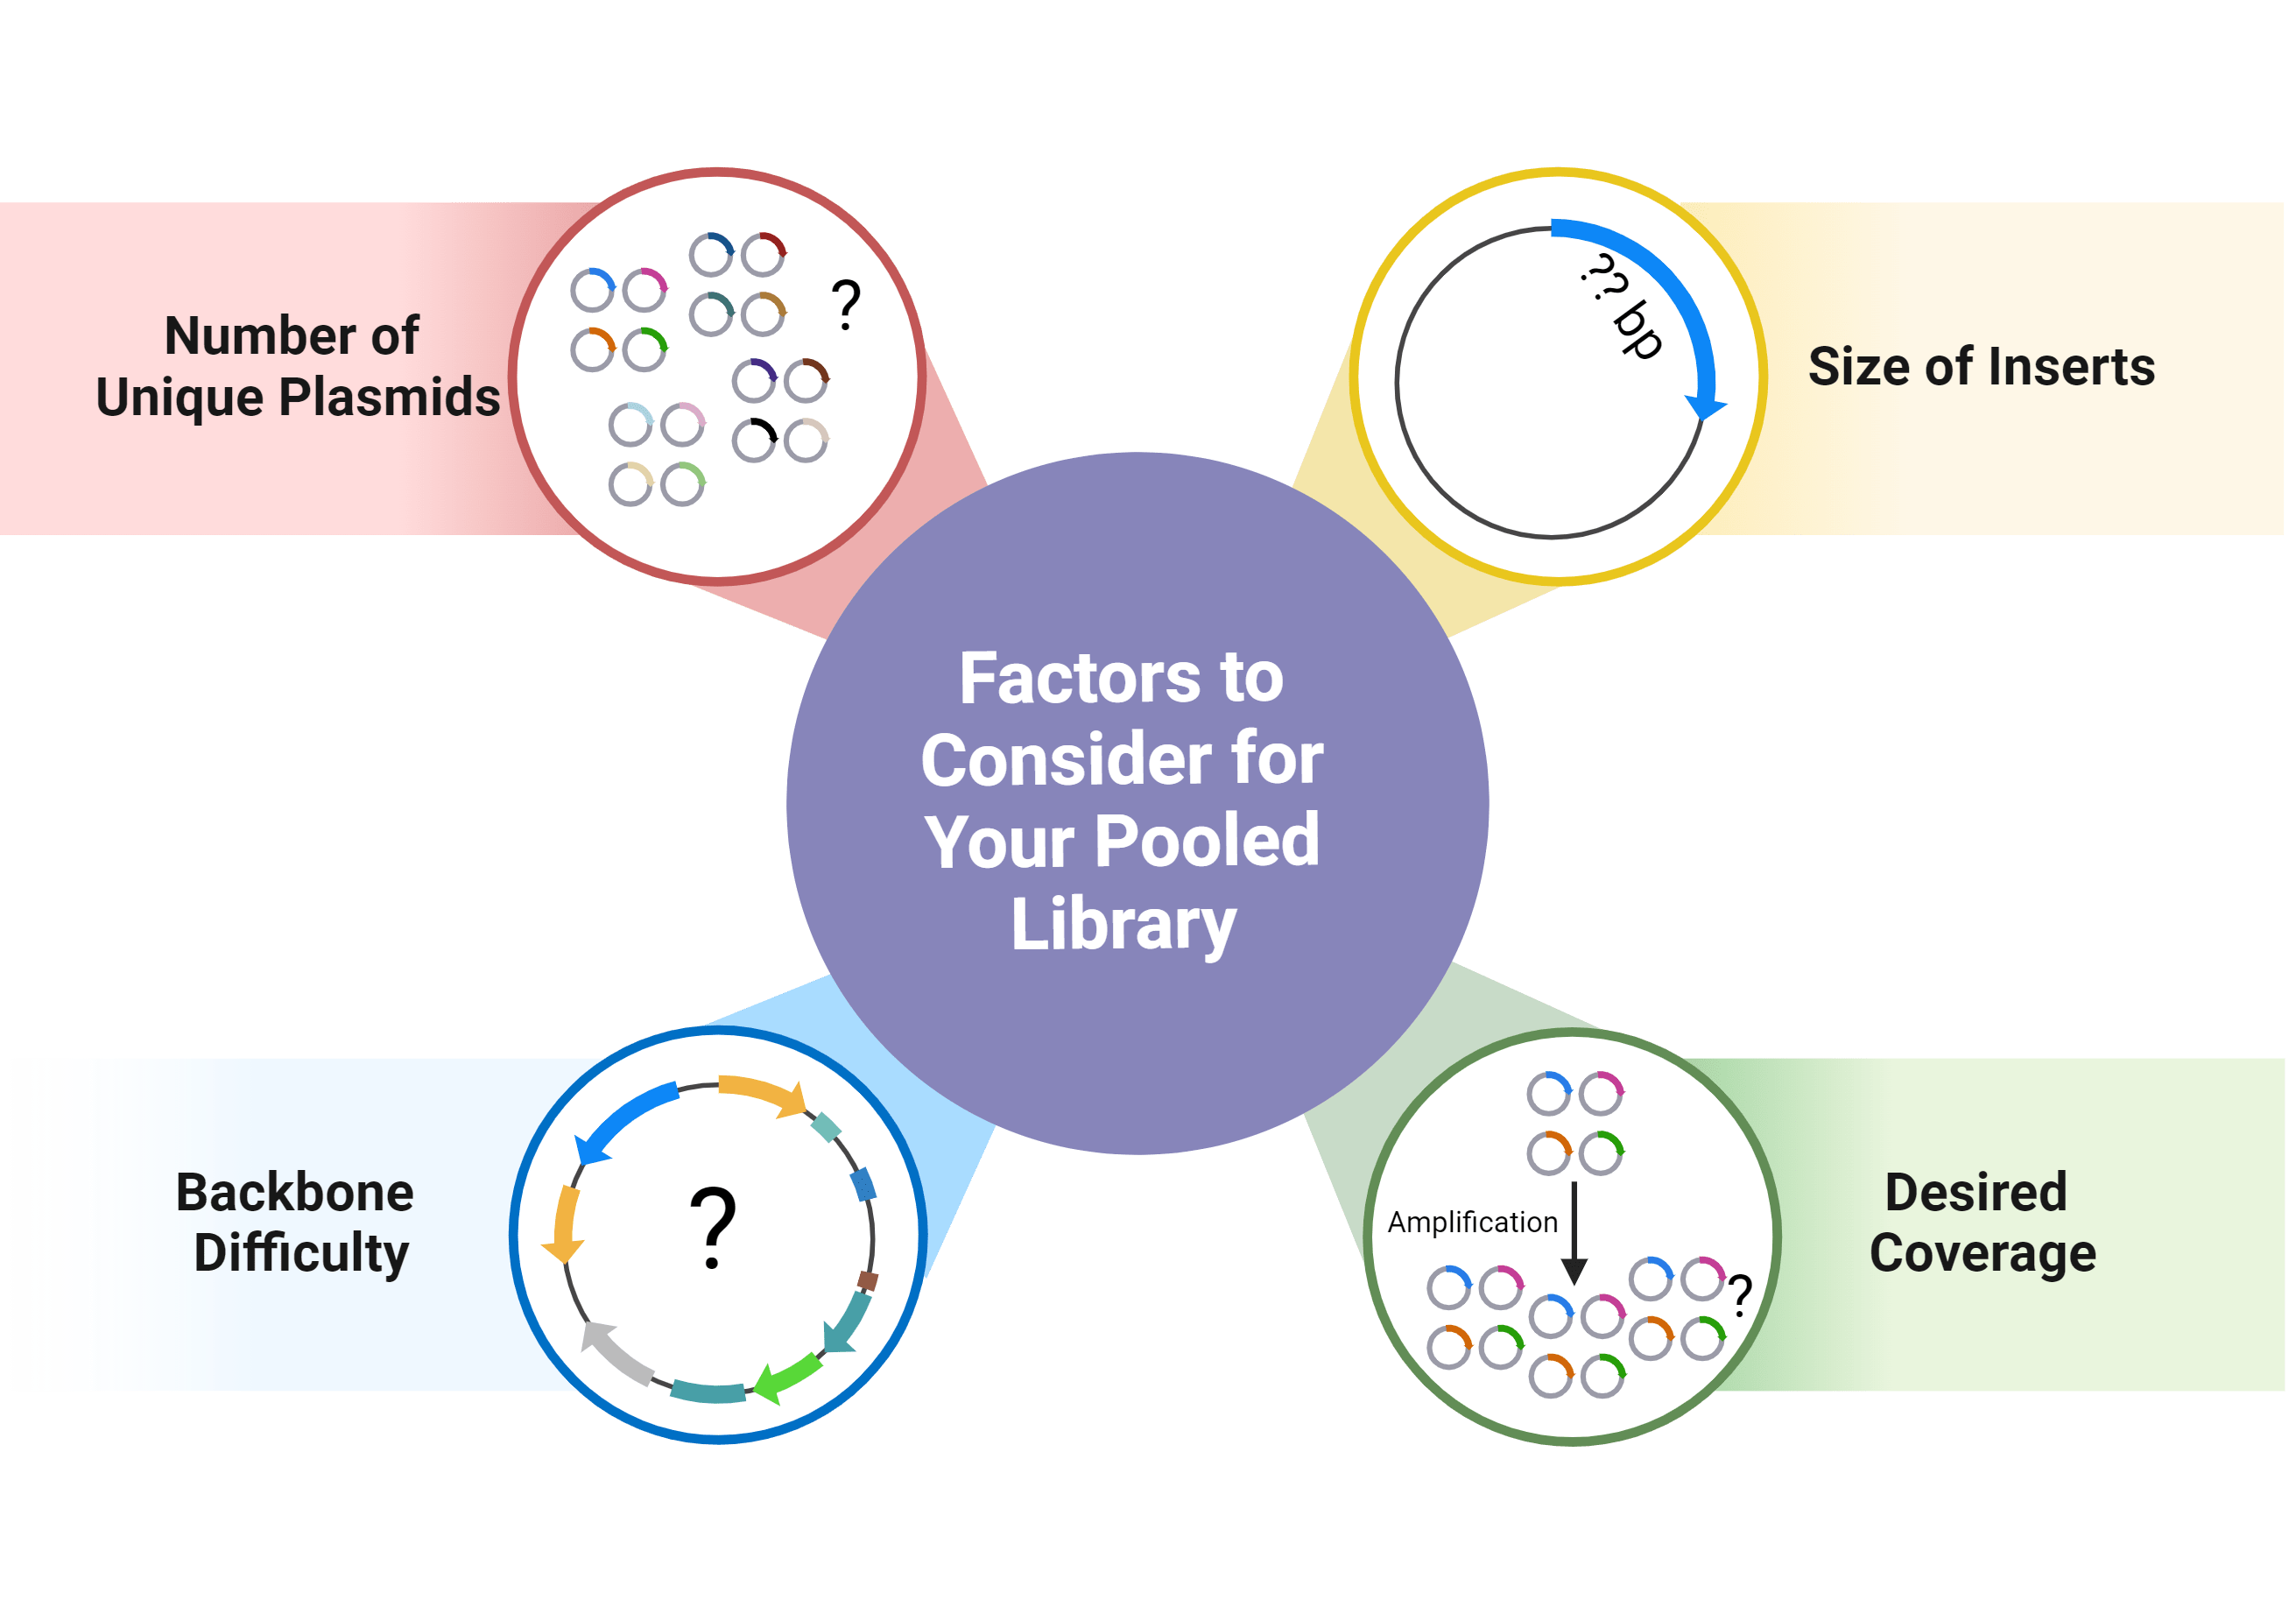 Cartoon depicting factors to consider for a pooled library when creating an amplification protocol; details are in text of link.